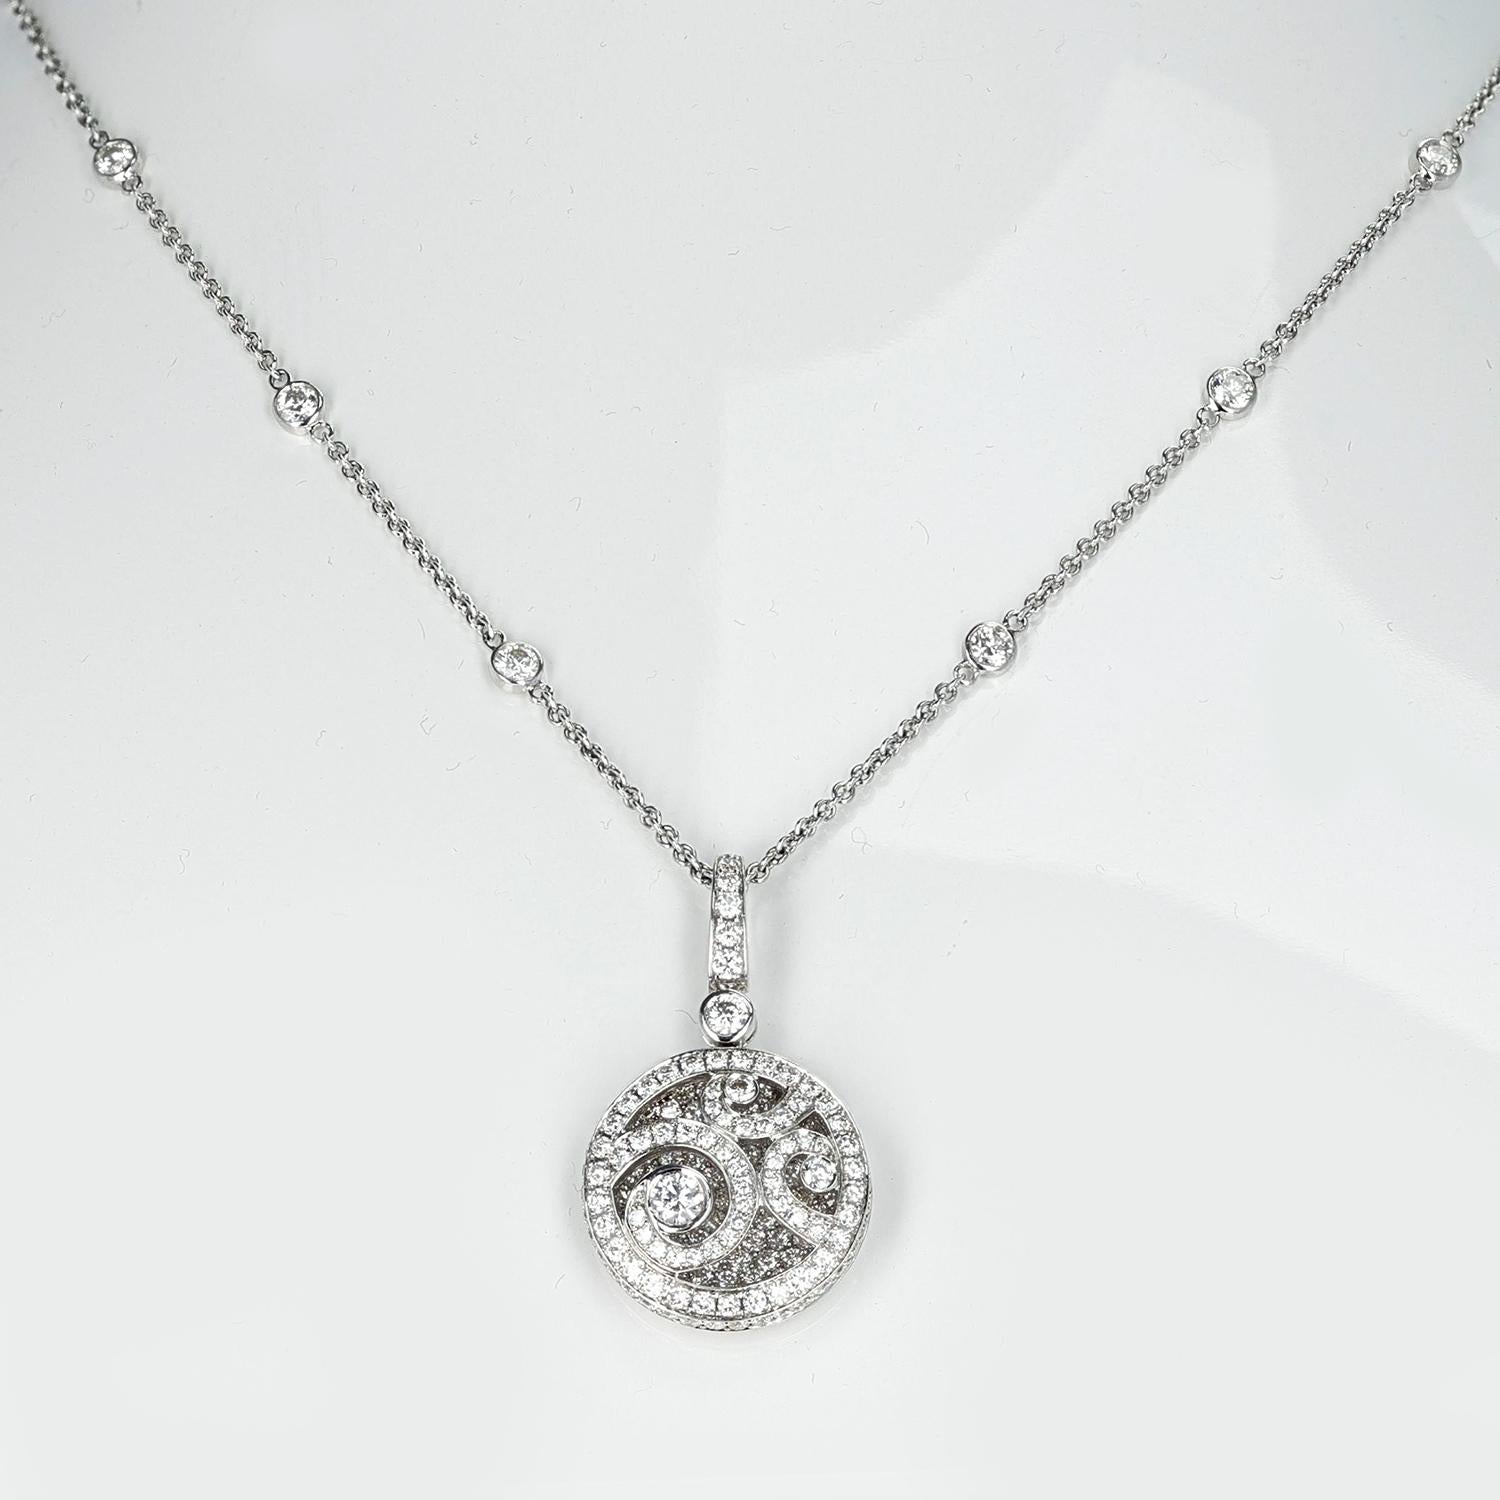 A Graff Diamond on Diamond Pendant on a Diamond Chain Necklace made in 18K White Gold. The total weight is 11.08 grams. The length is 16.75.